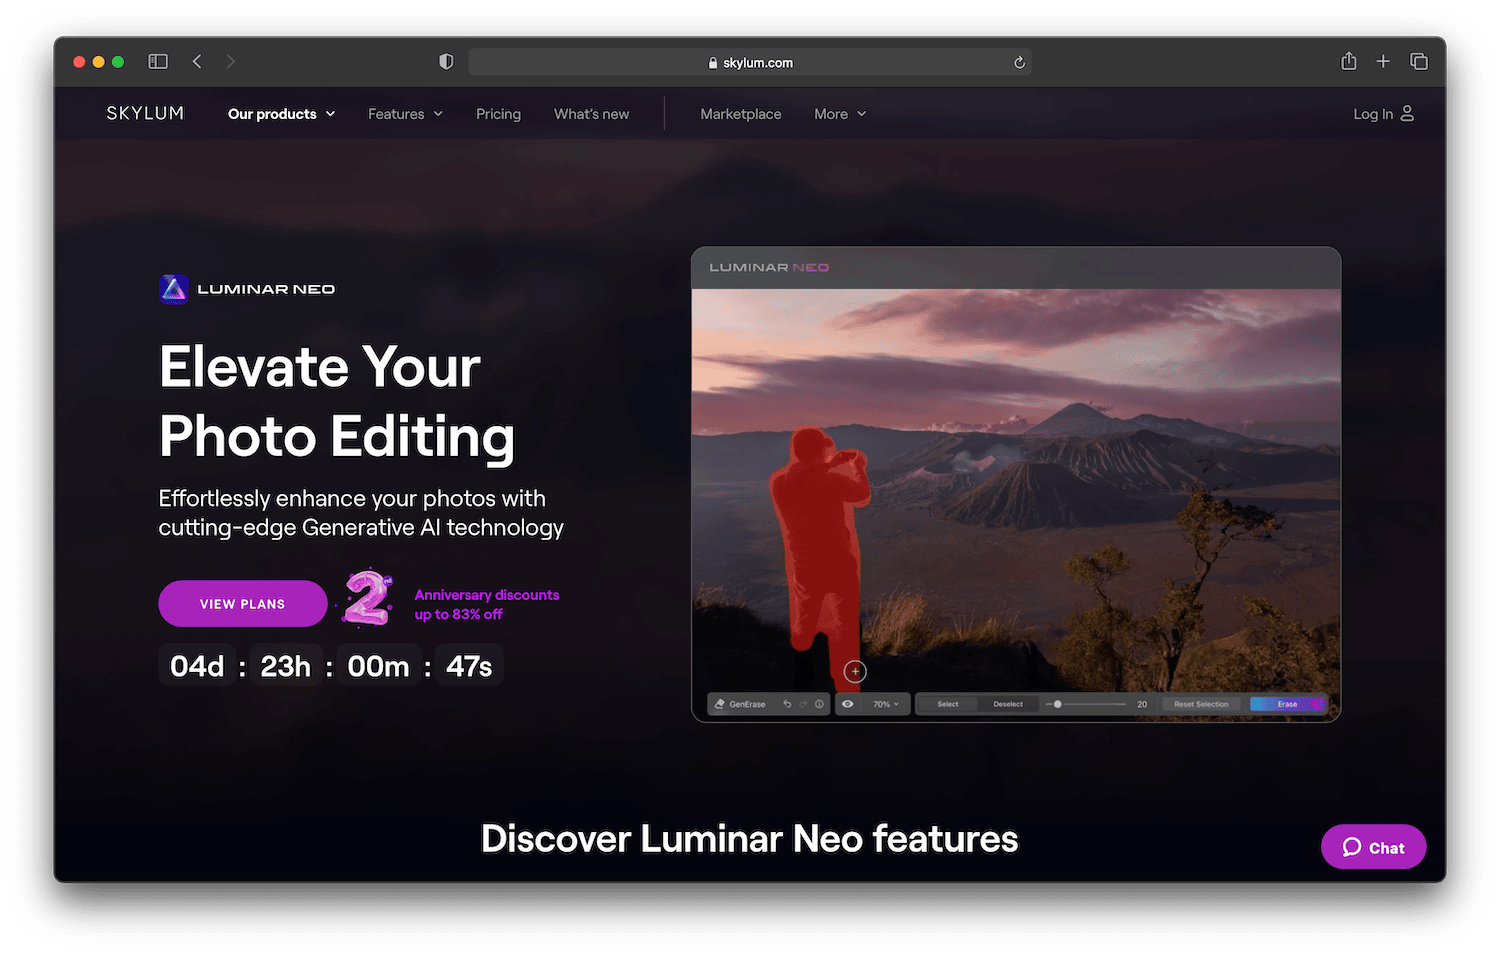 The Full Guide to AI Image Editors: Top Tools & Reviews